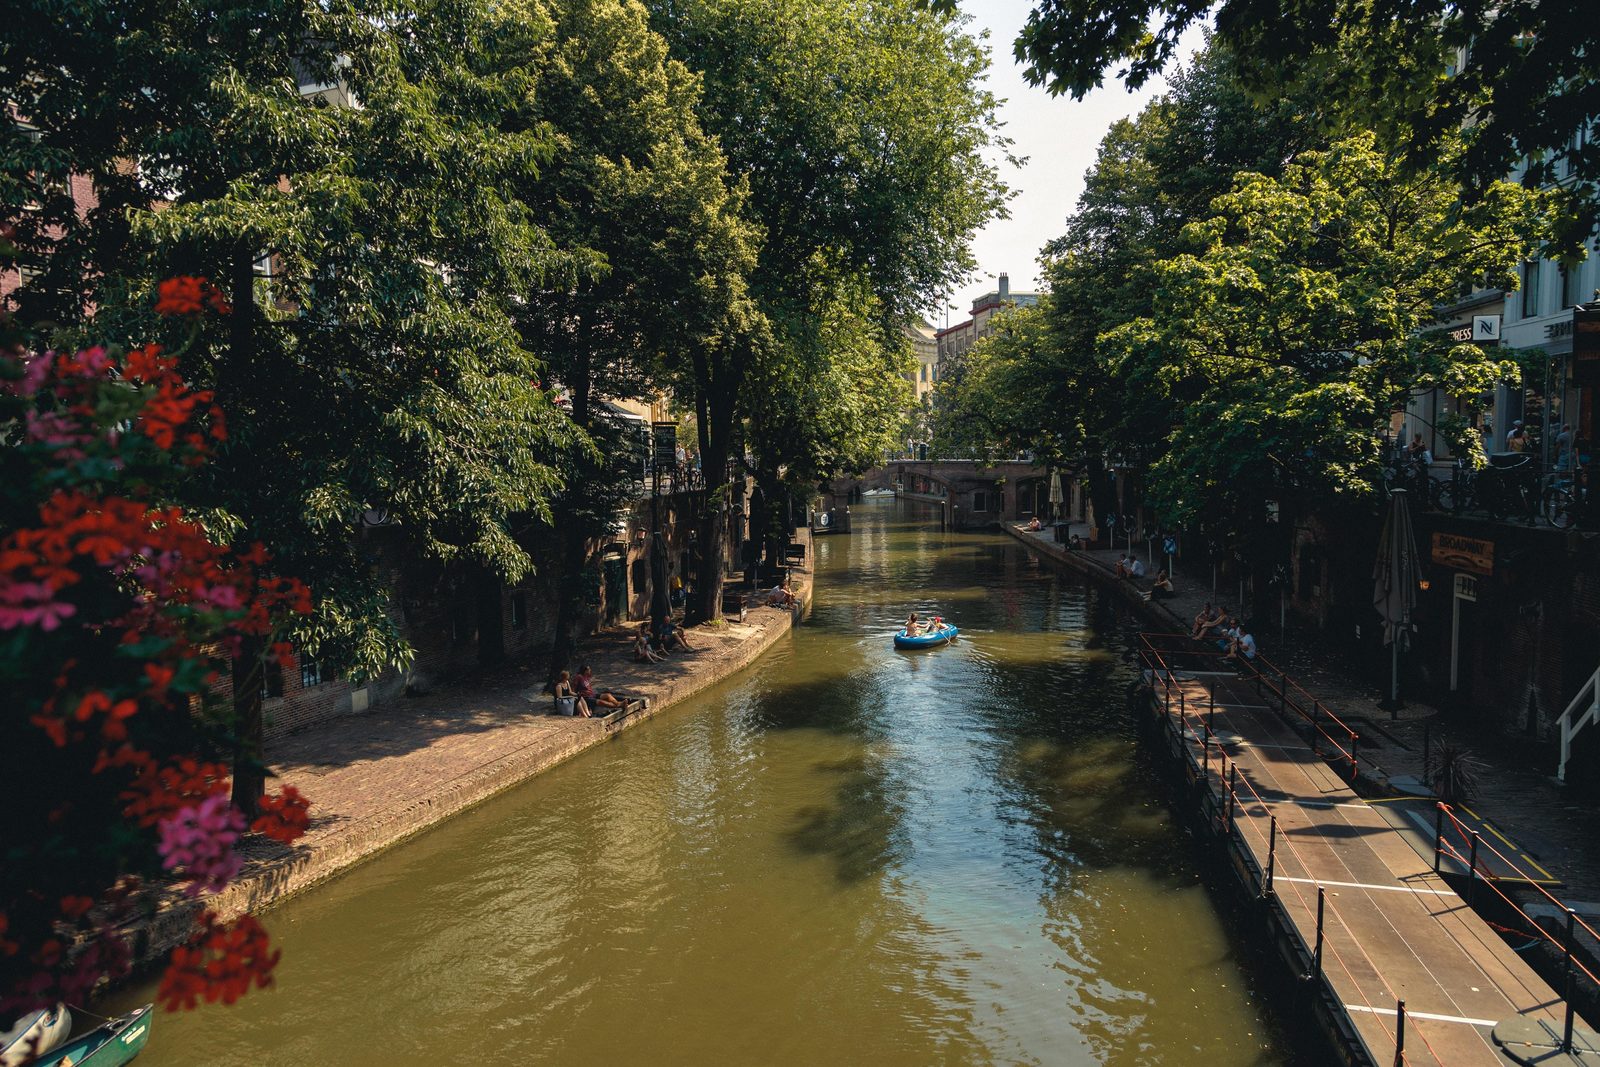 Take a boat ride on the canals